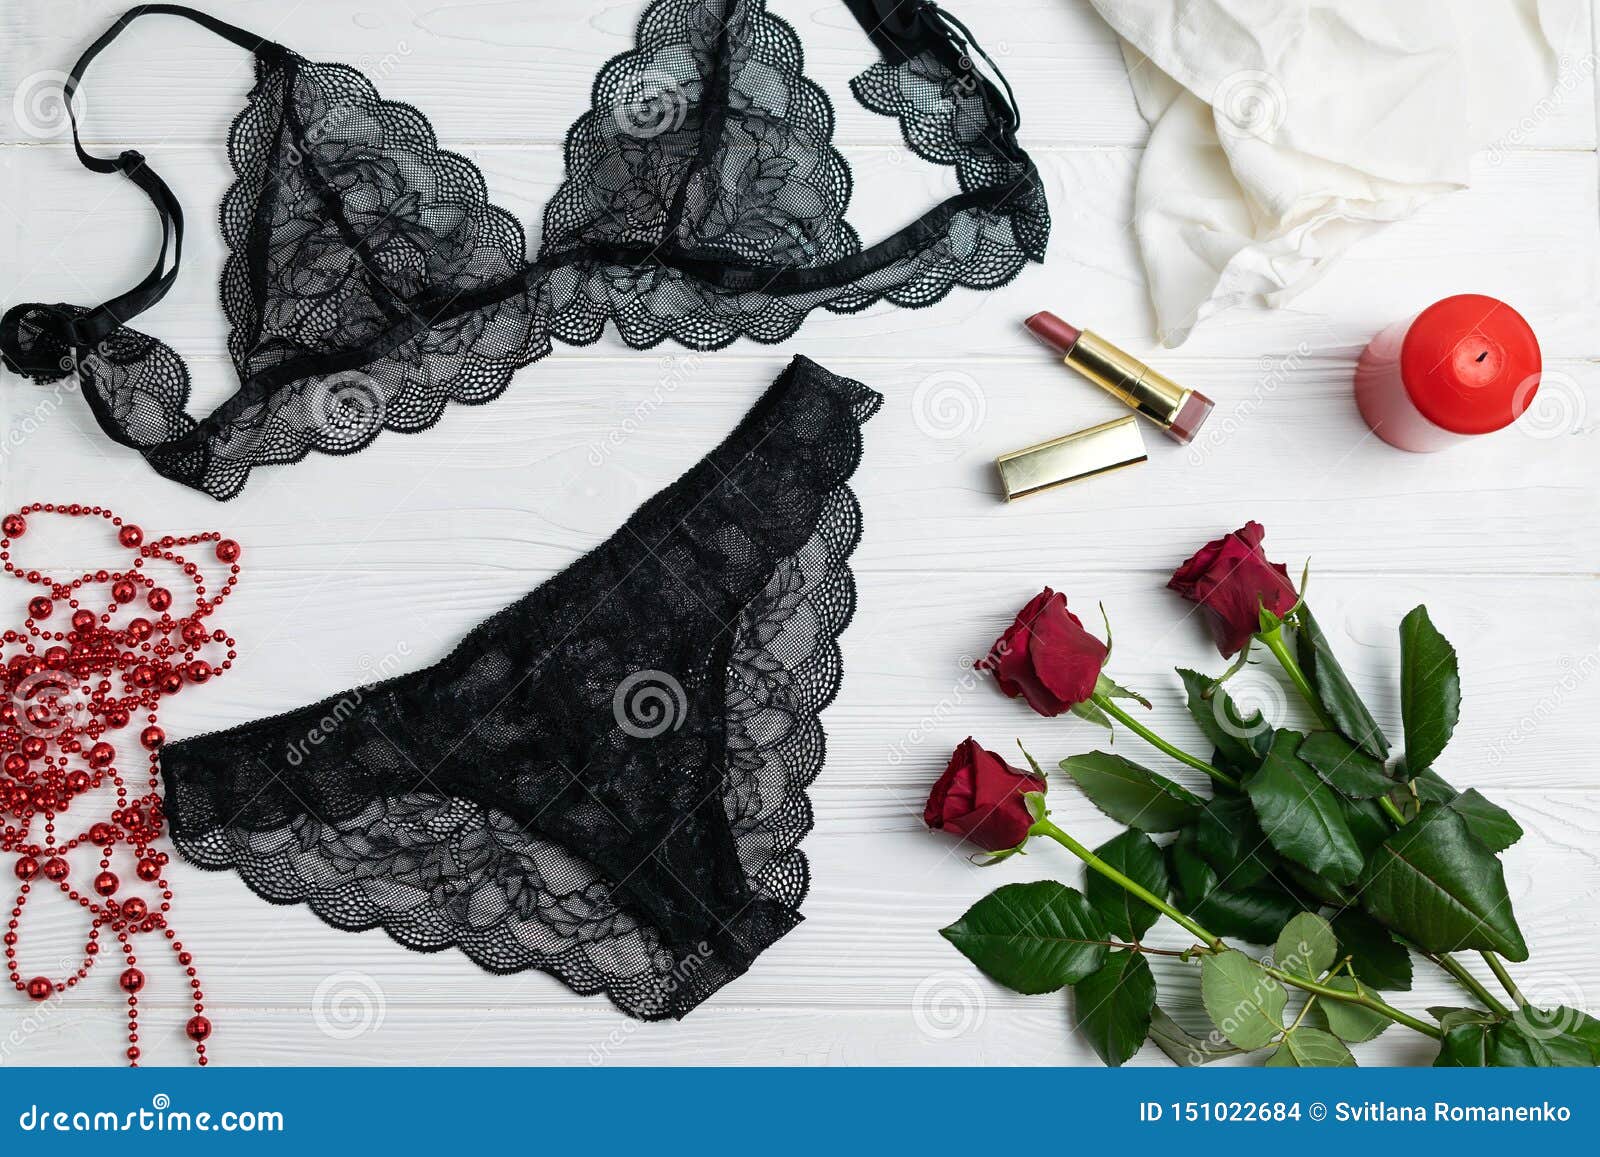 Romantic couple in lingerie with red rose on black background. Stock Photo